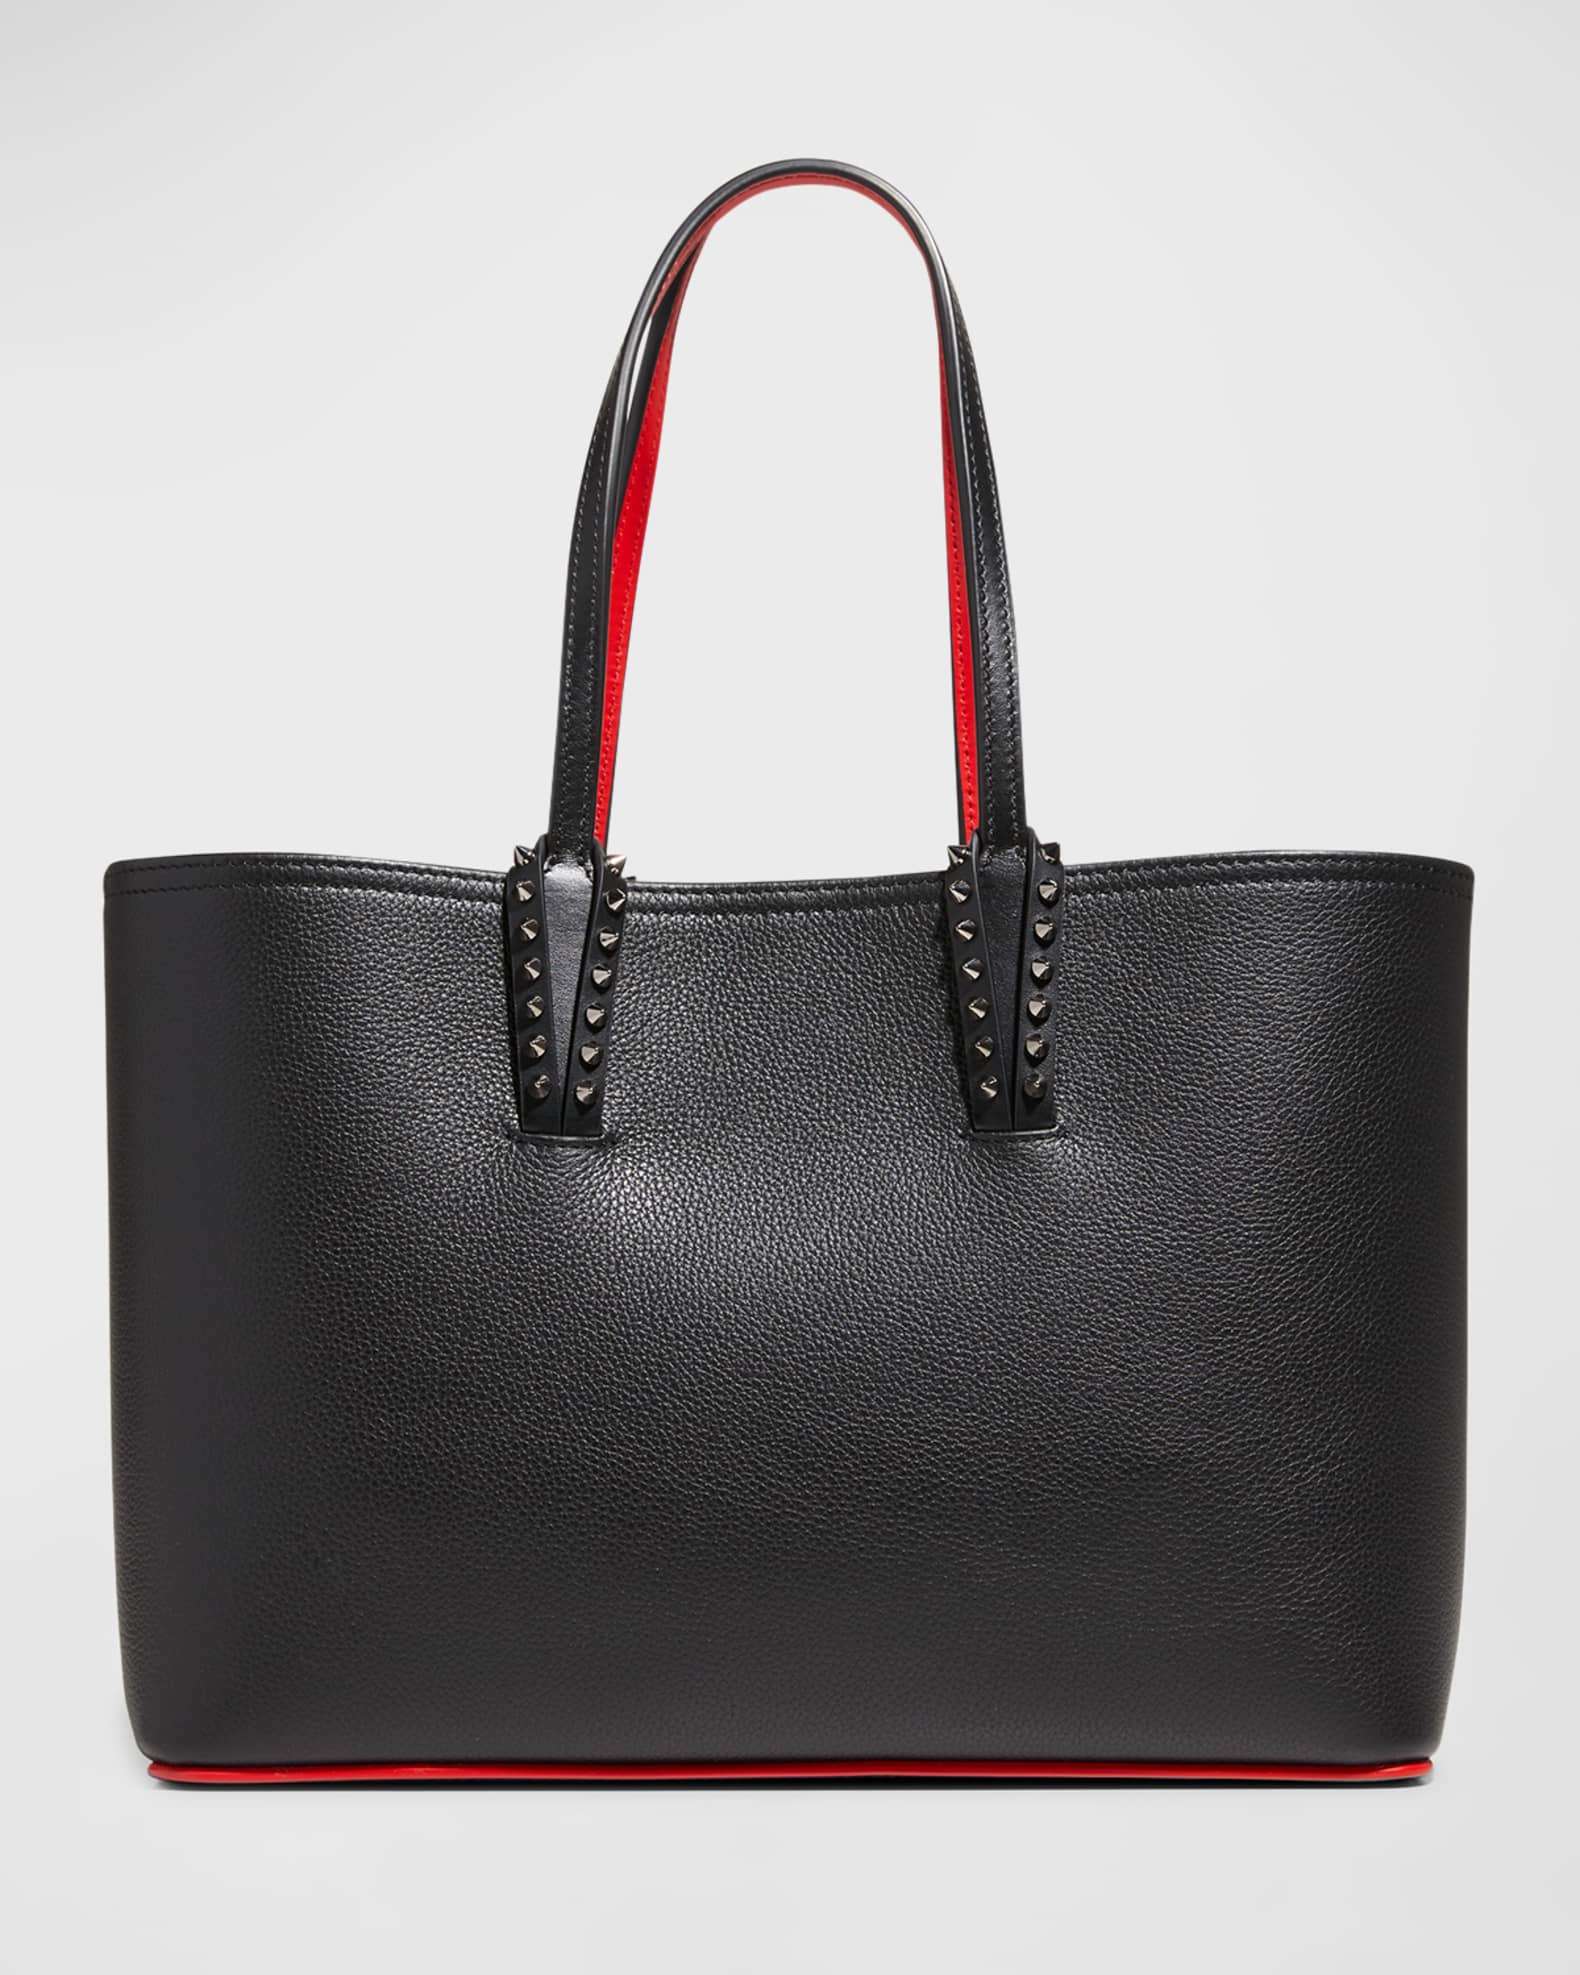 Christian Louboutin Cabata Small Tote in Grained Leather | Neiman Marcus